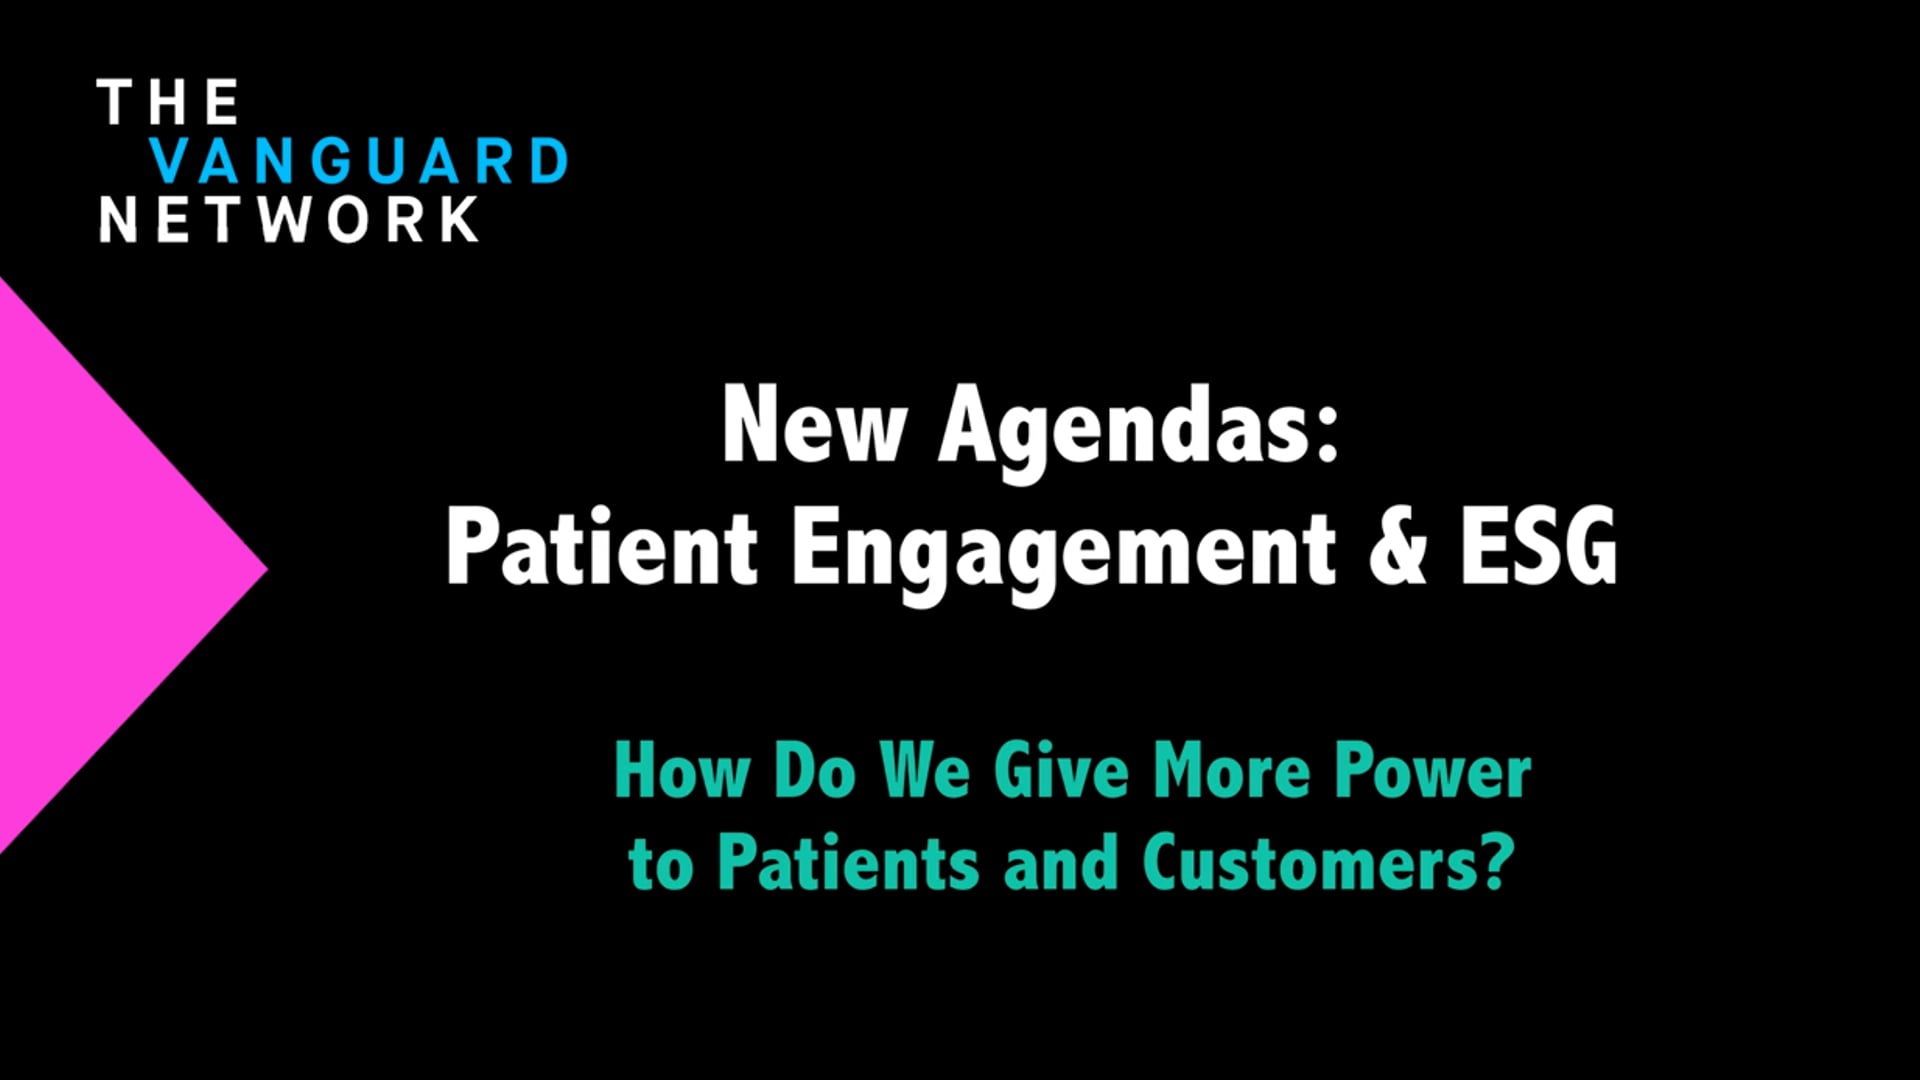 New Agendas: Patient Engagement & ESG How Do We Give More Power to Patients and Customers?